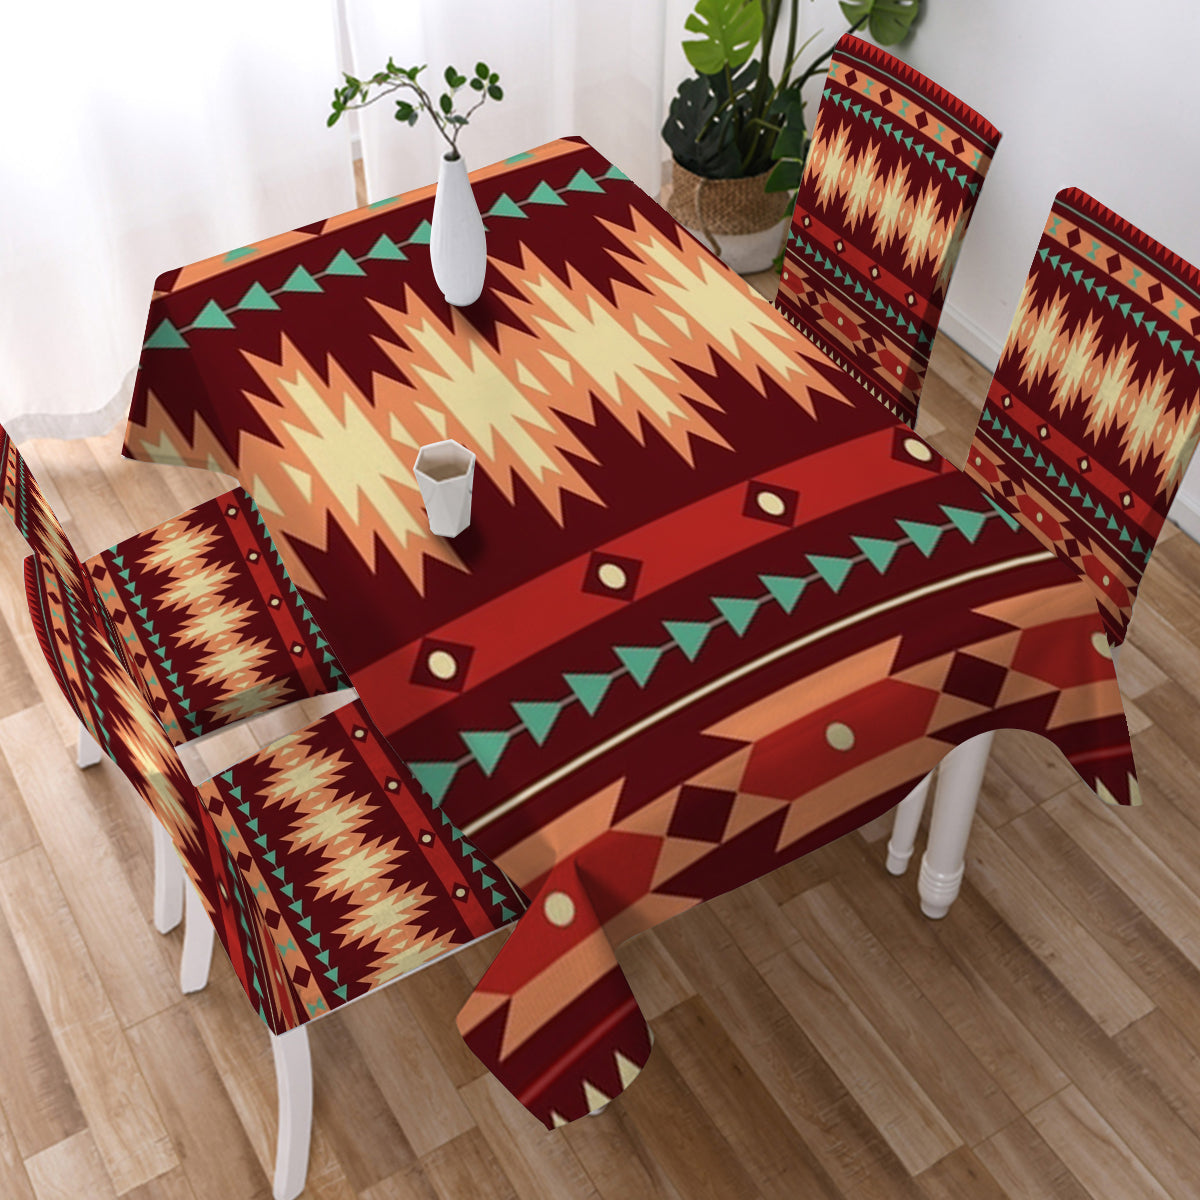 Powwow Store gb nat00510 red ethnic pattern tablecloth